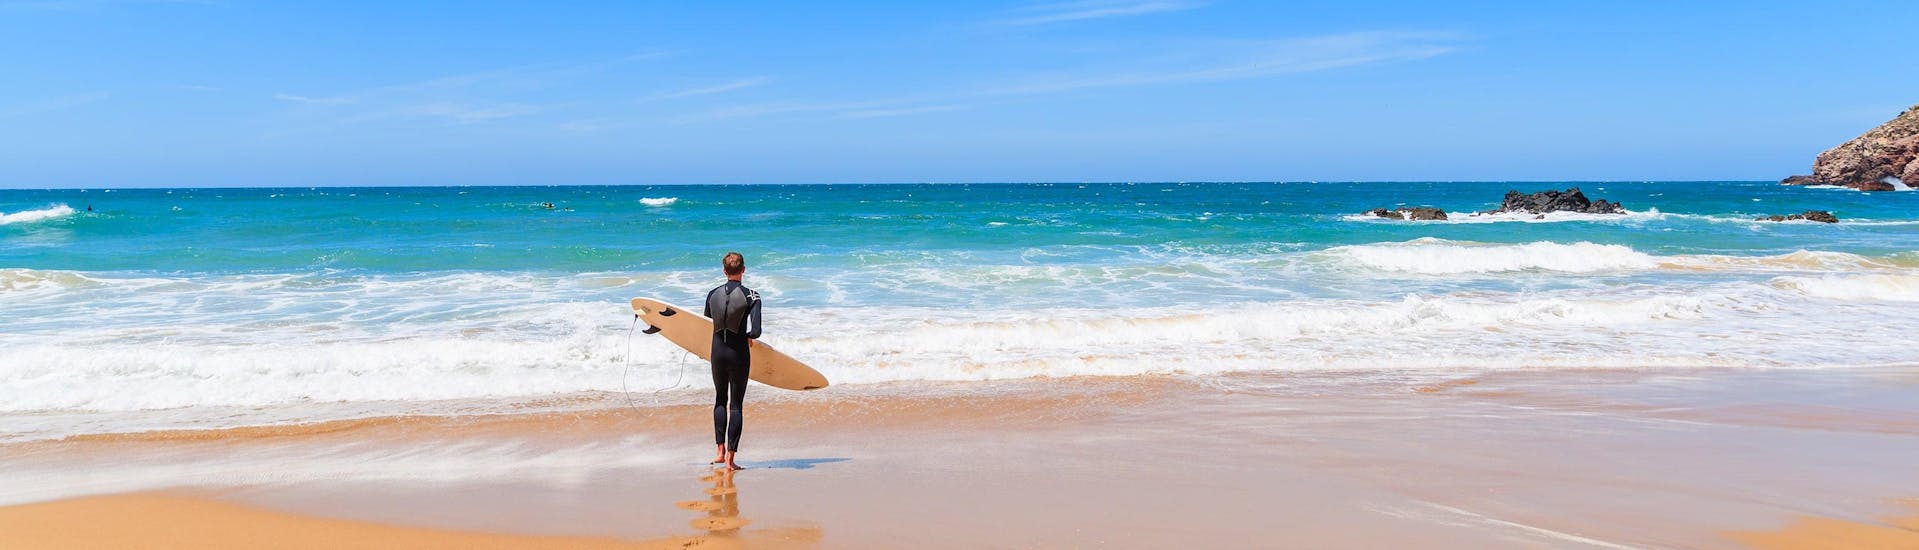 A young man dressed in a wetsuit is standing on a beach with his surfboard, looking out over the ocean as he gets ready to go surfing in Aljezur.